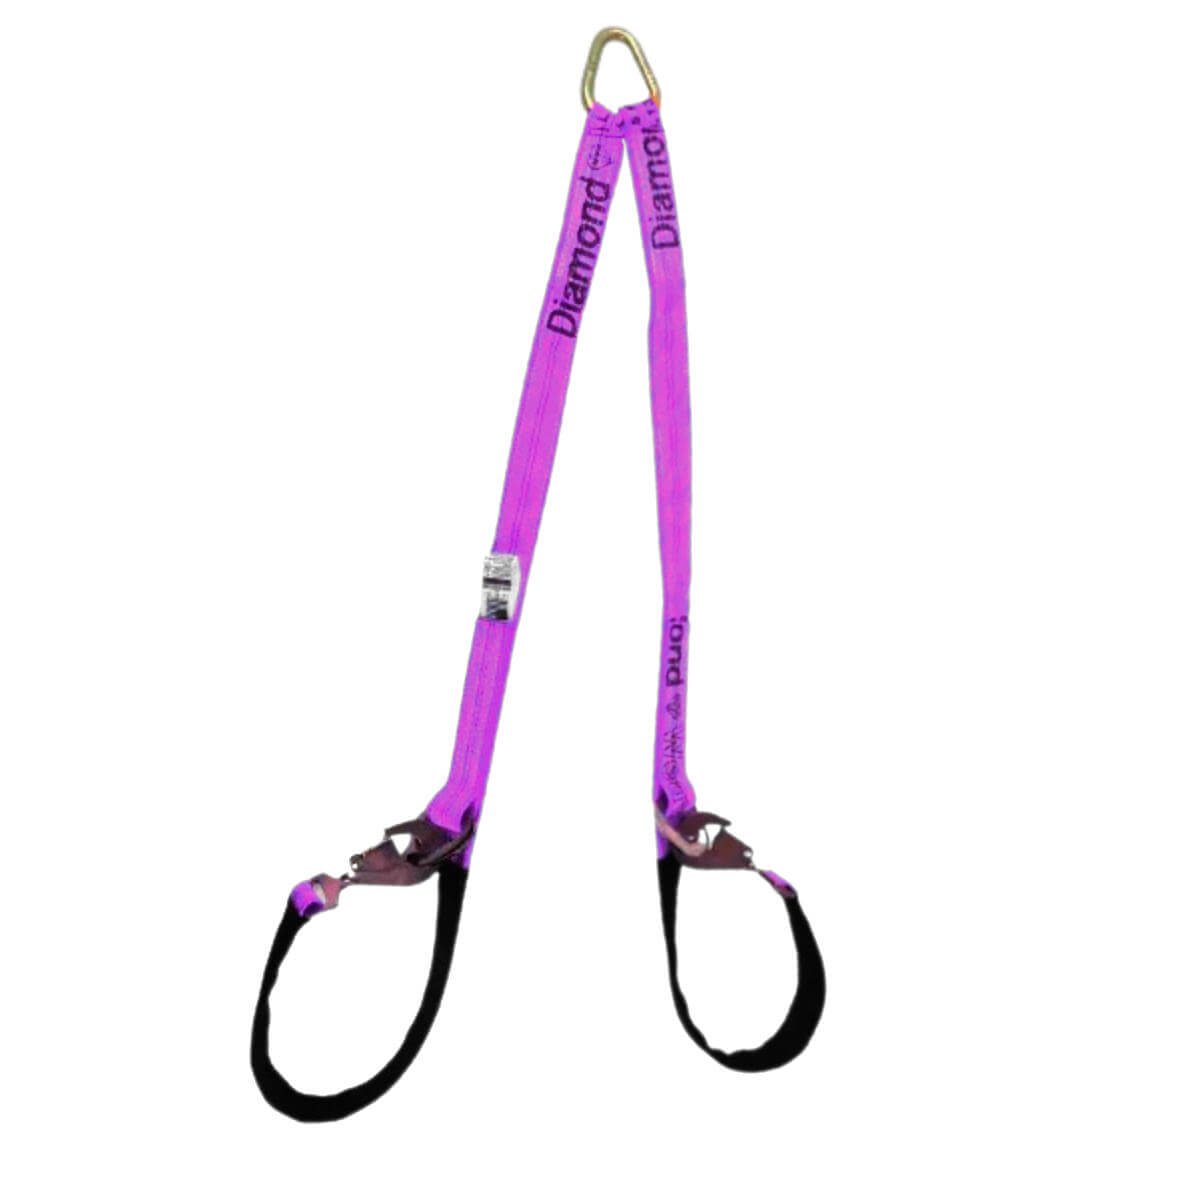 Securely tow and transport luxury vehicles with this tough axle v-bridle car carrier tie-down strap!  Made with thick Purple Diamond Weave webbing these straps help reduce damage to the under carriage of vehicle.